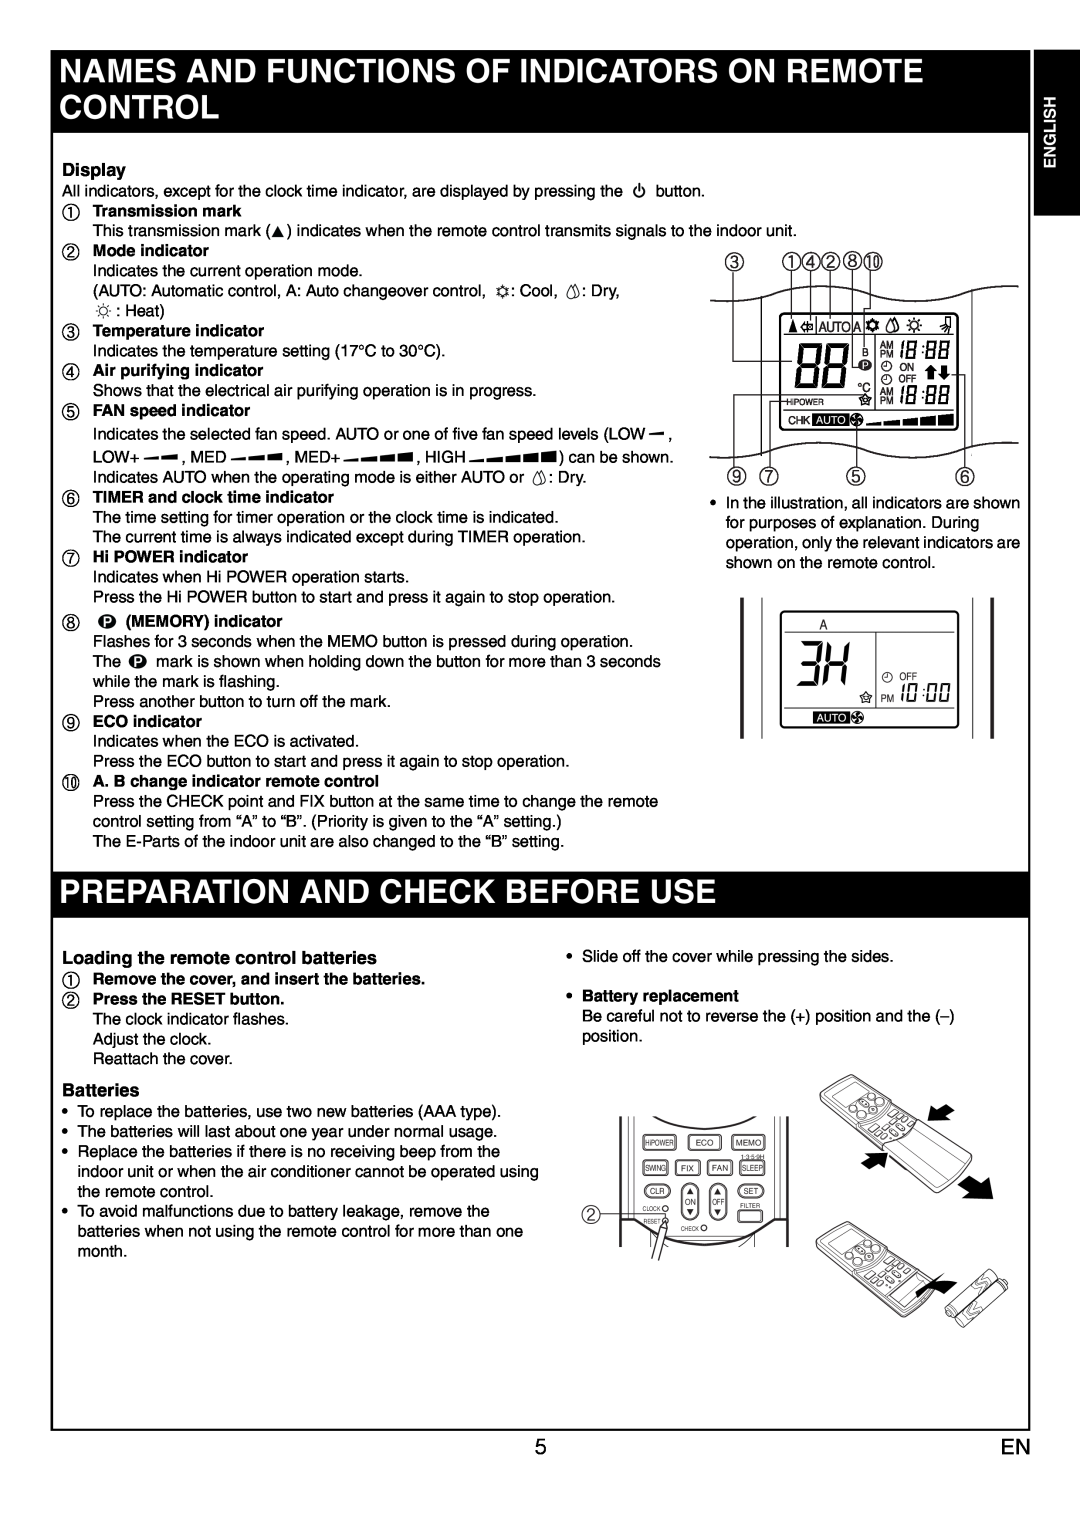 Toshiba RAS-10JKVP-E Preparation And Check Before Use, Display, adbhj, Loading the remote control batteries, Batteries 